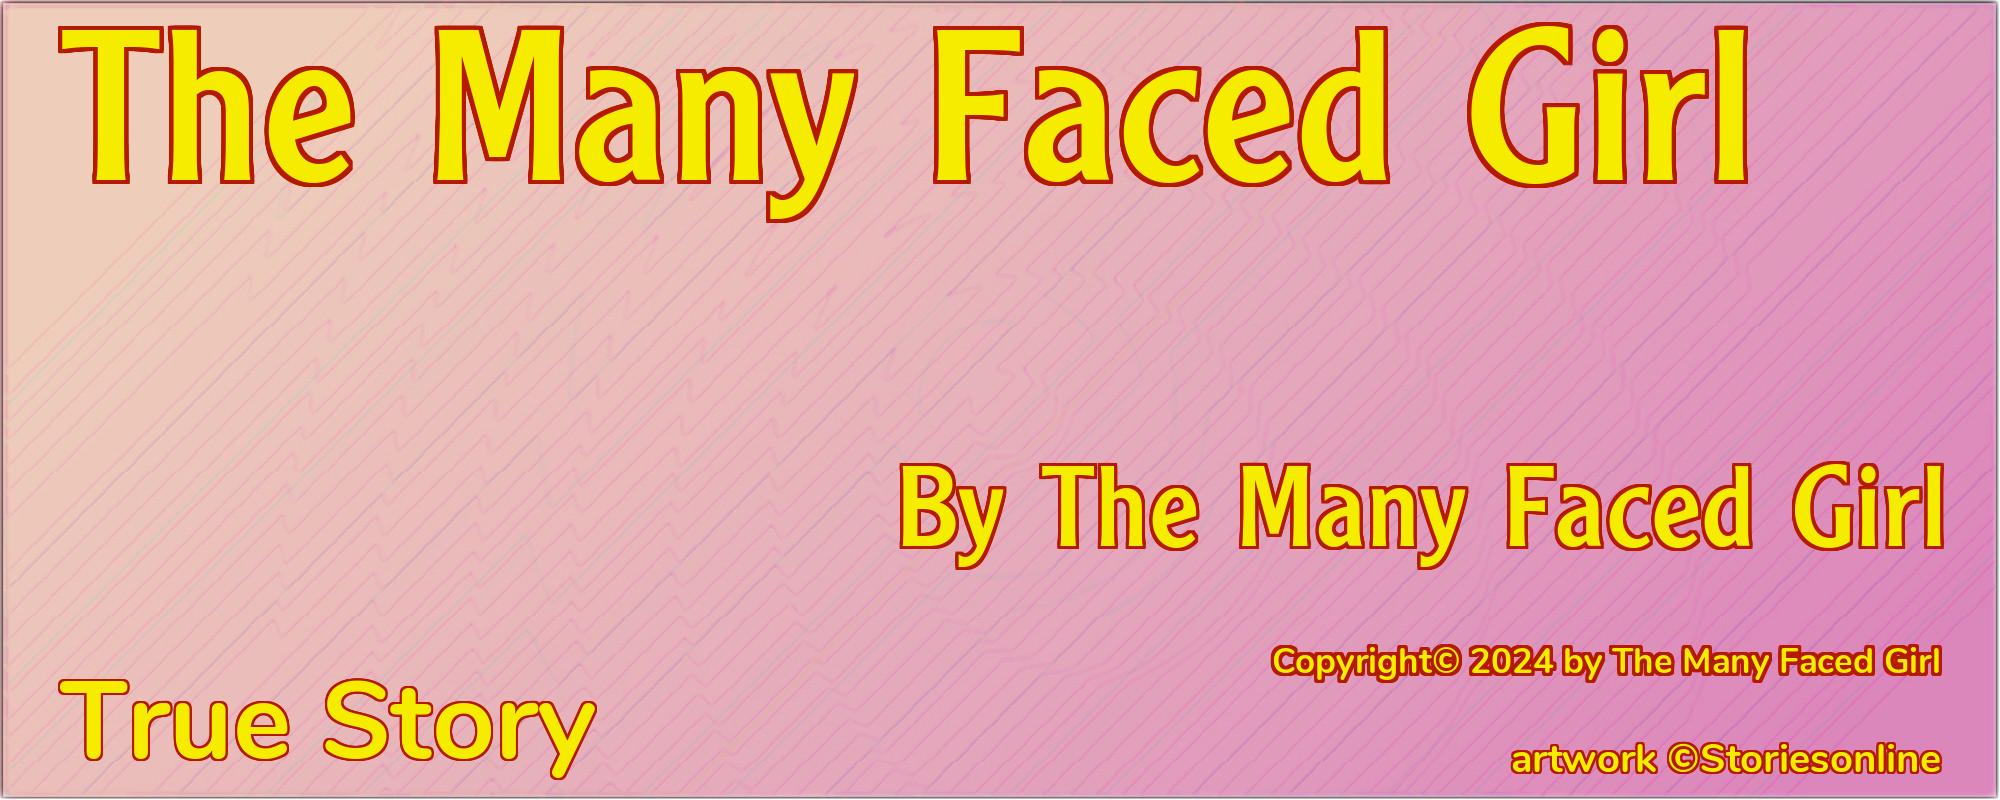 The Many Faced Girl - Cover